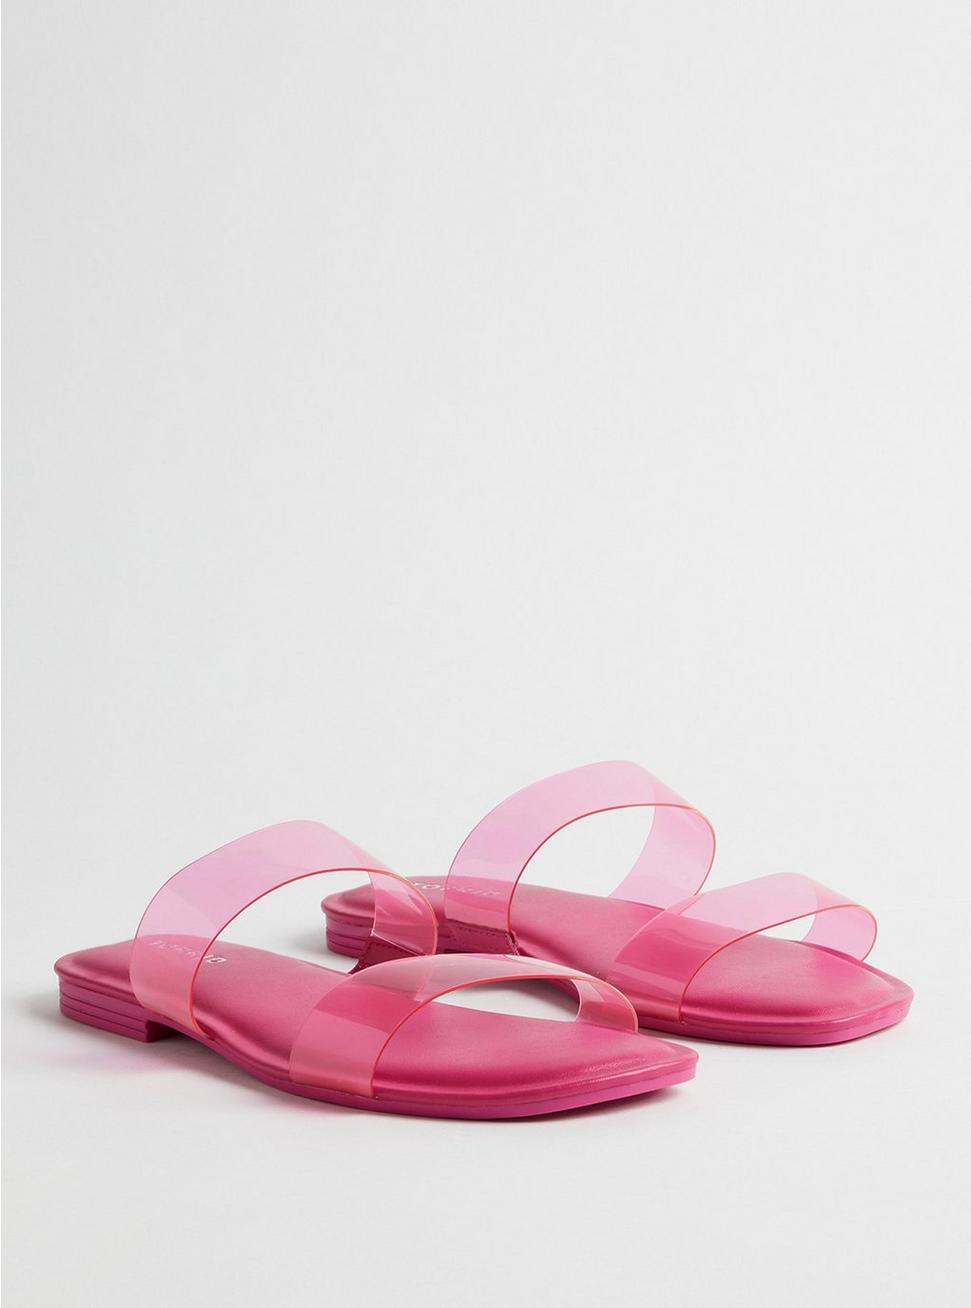 Lucite Strappy Sandal (WW), PINK, hi-res